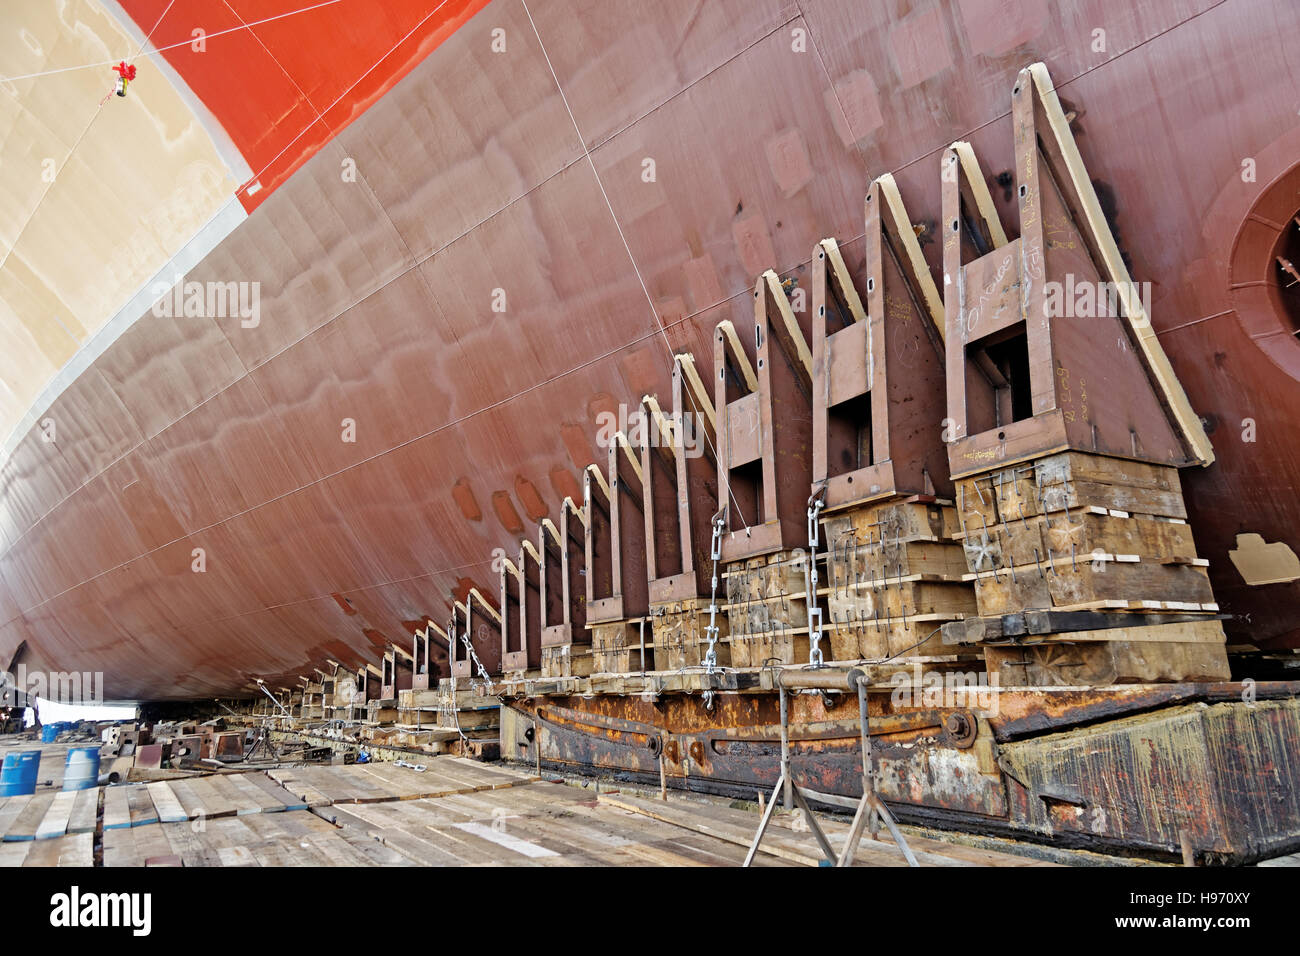 new ship is ready for launching in shipyard Stock Photo